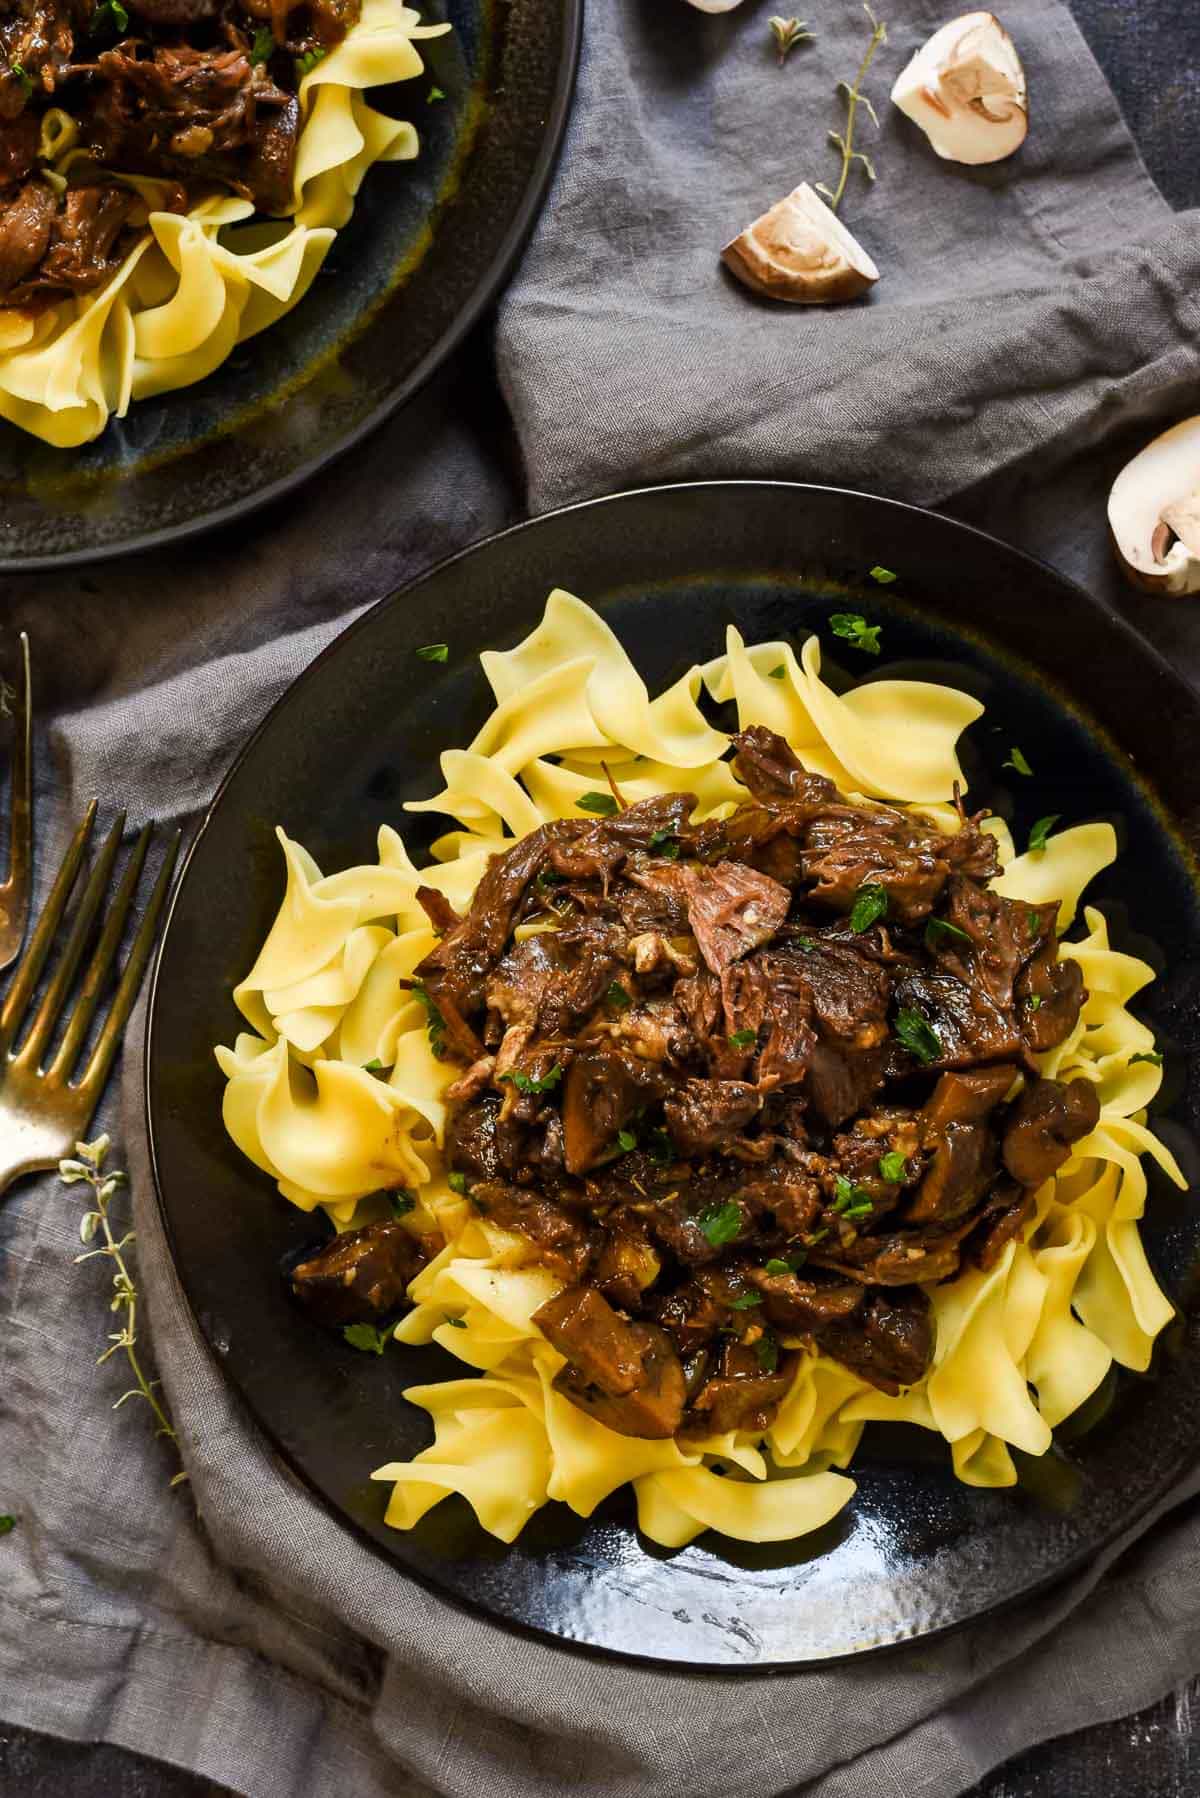 Serve this Red Wine Pot Roast with Mushrooms over egg noodles for a super comforting, hearty weeknight meal. 